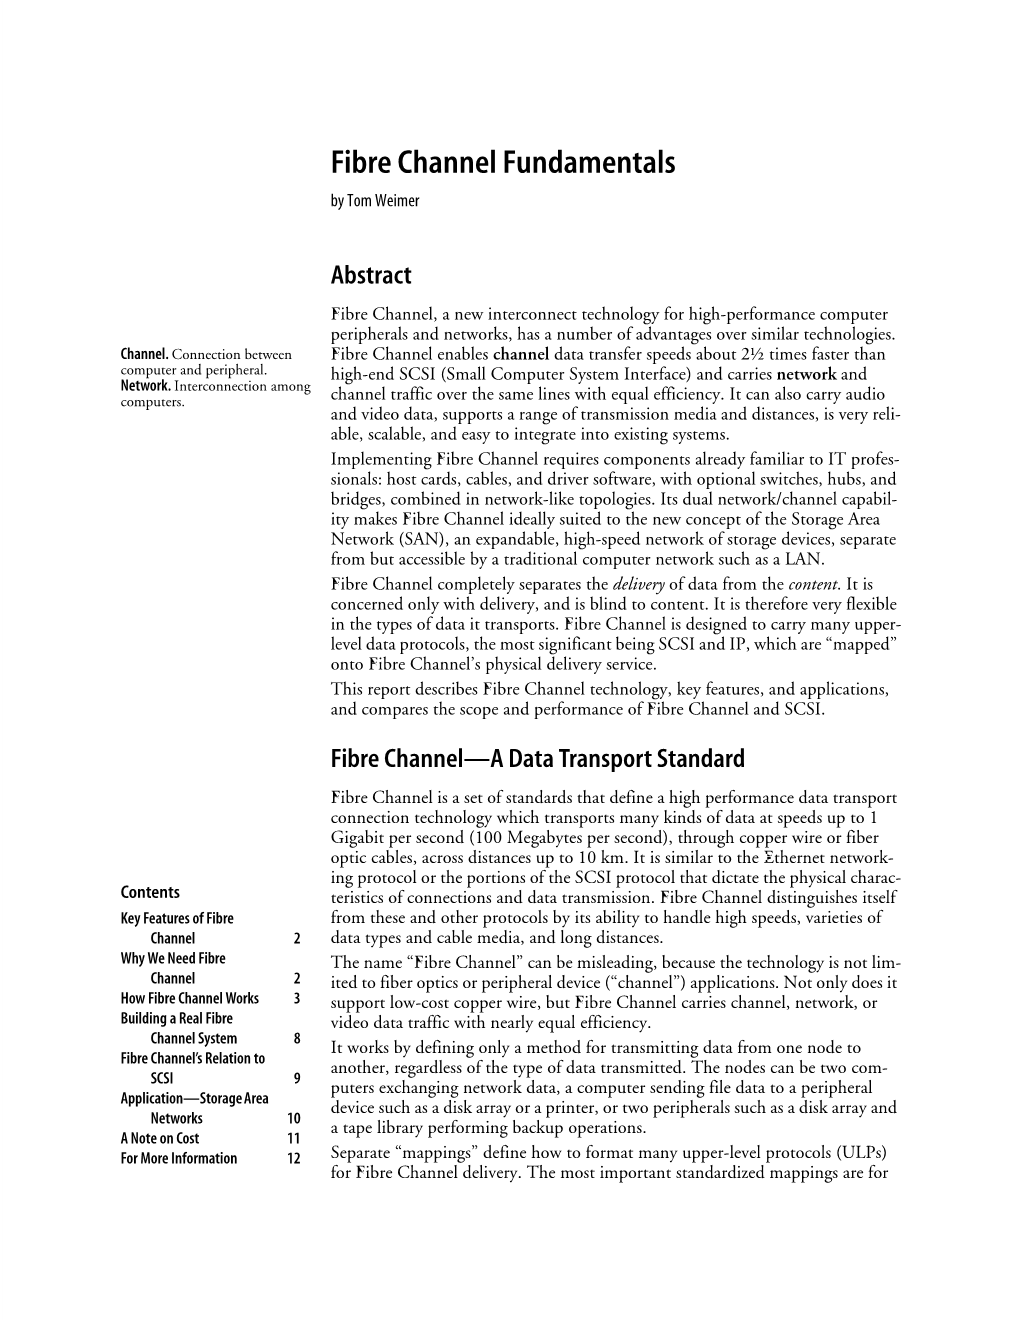 Fibre Channel Fundamentals by Tom Weimer